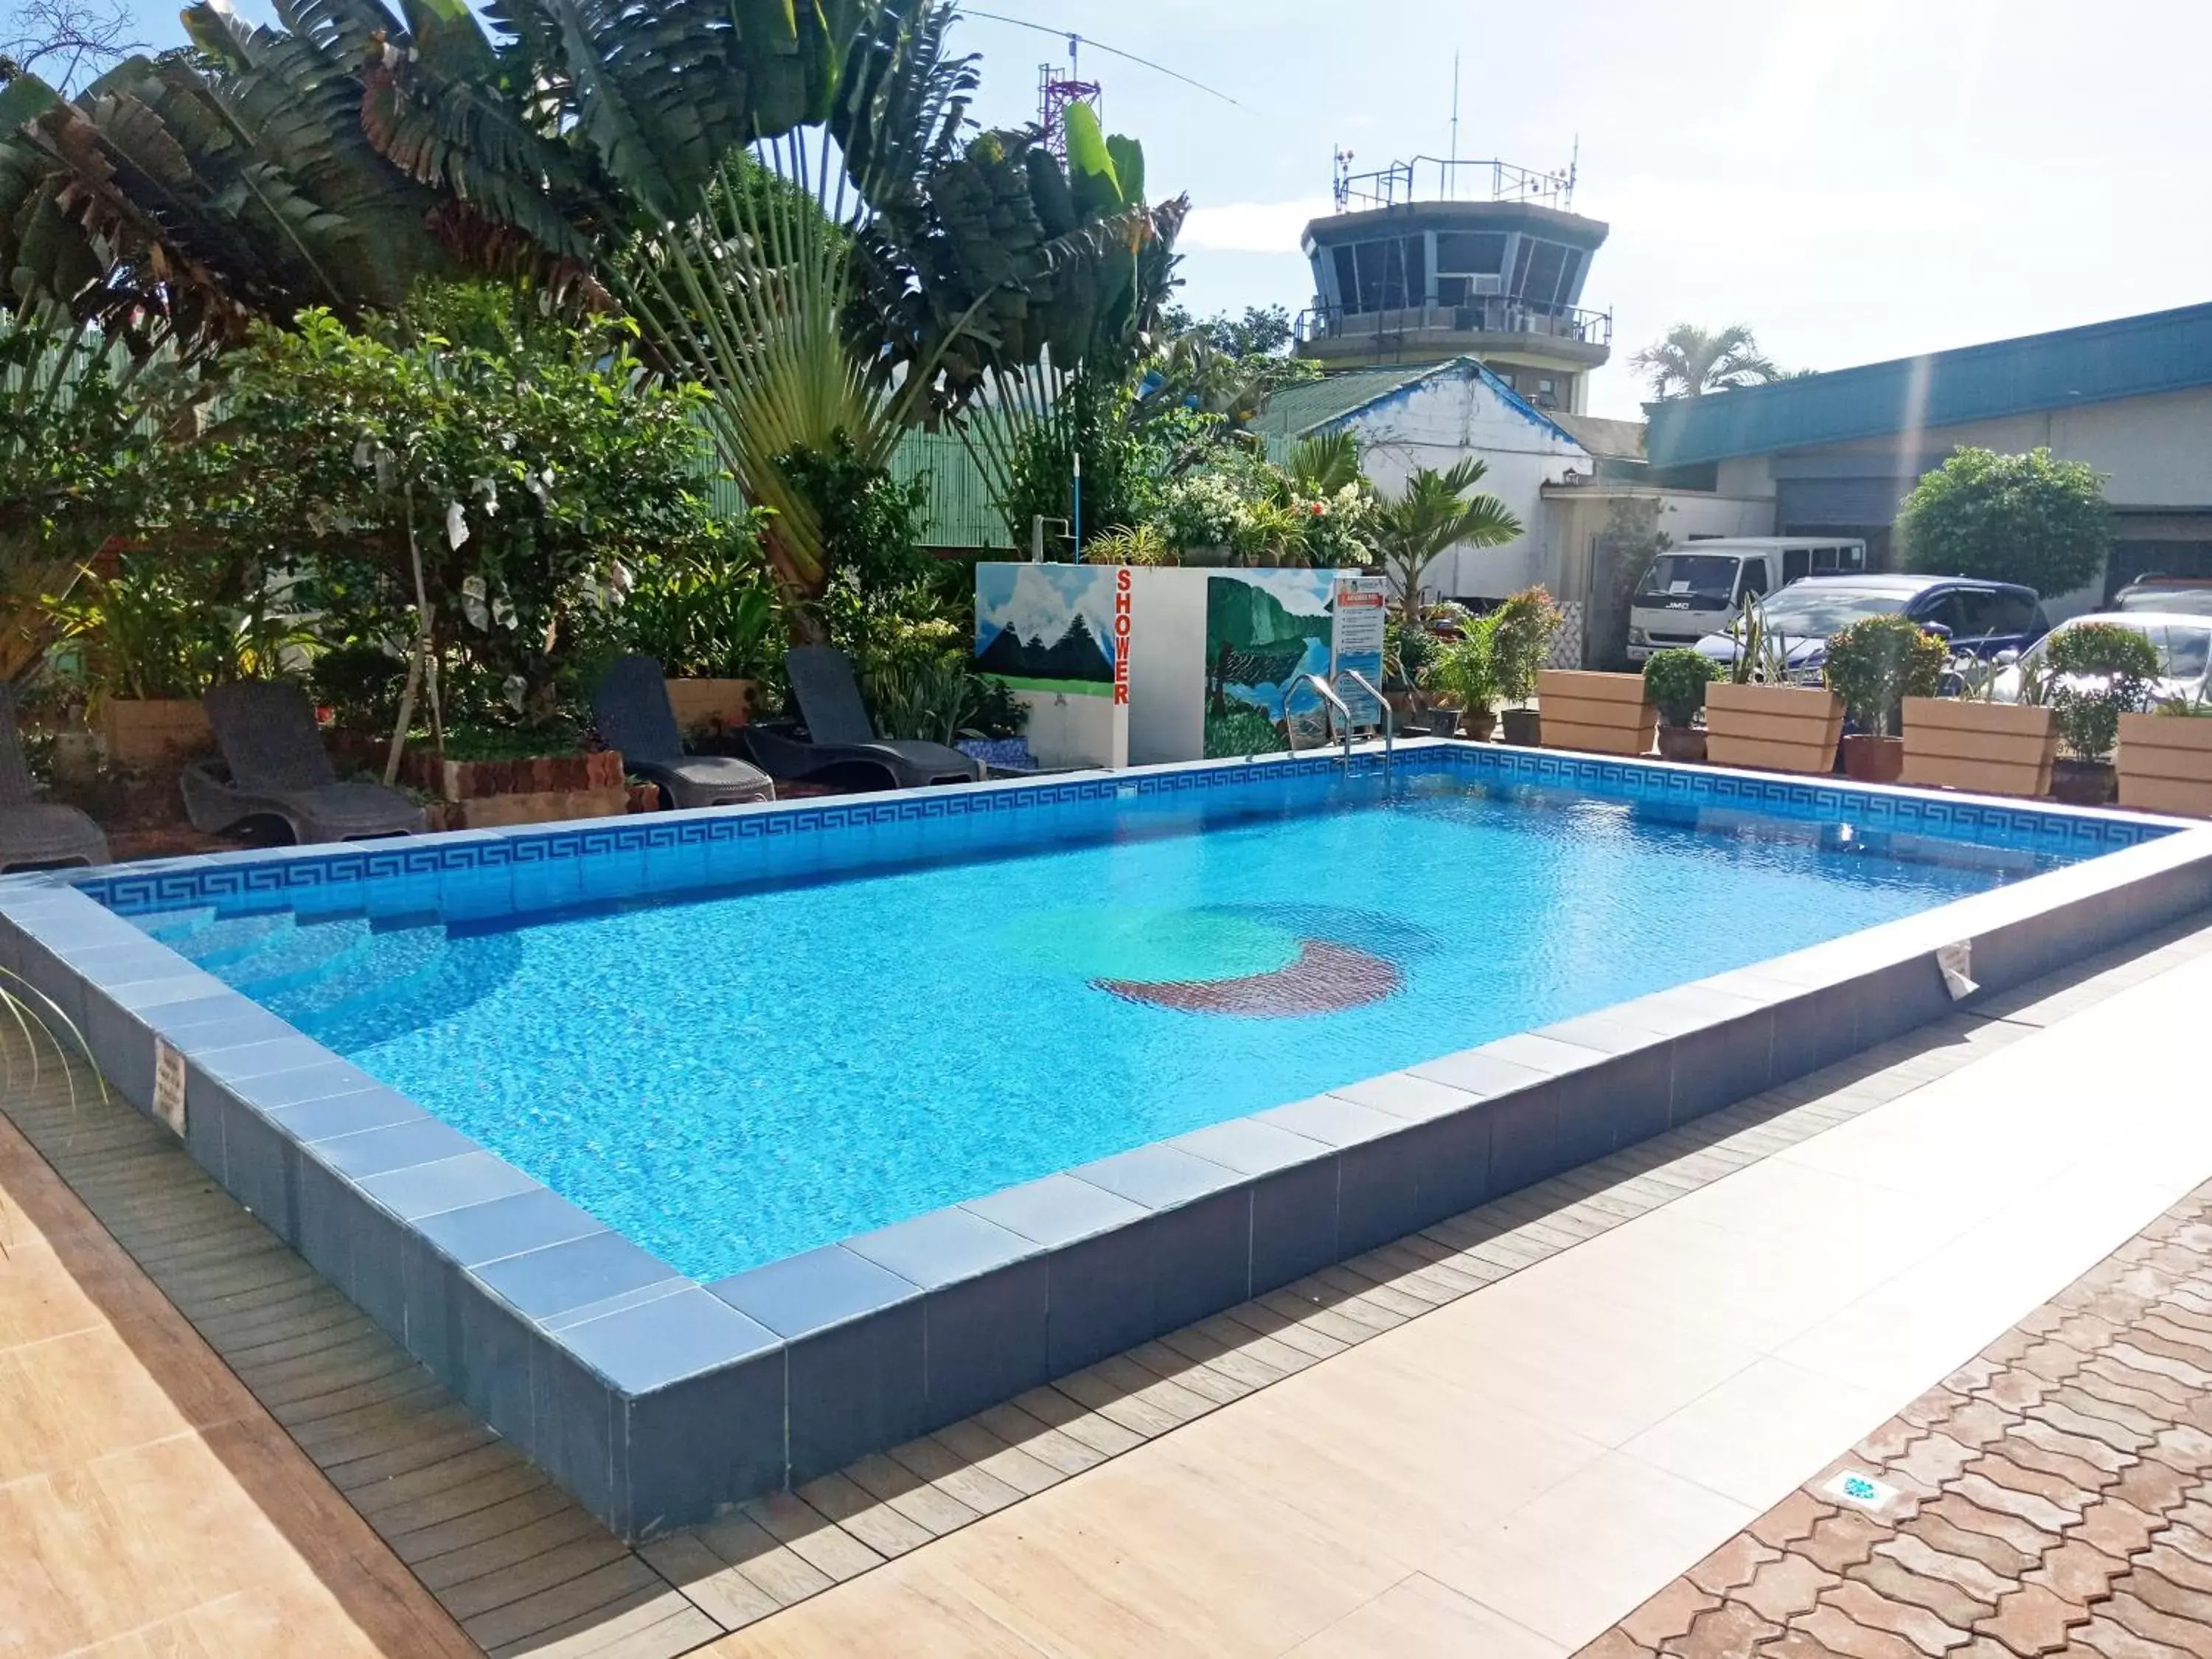 Swimming Pool in Aerostop Hotel and Restaurant